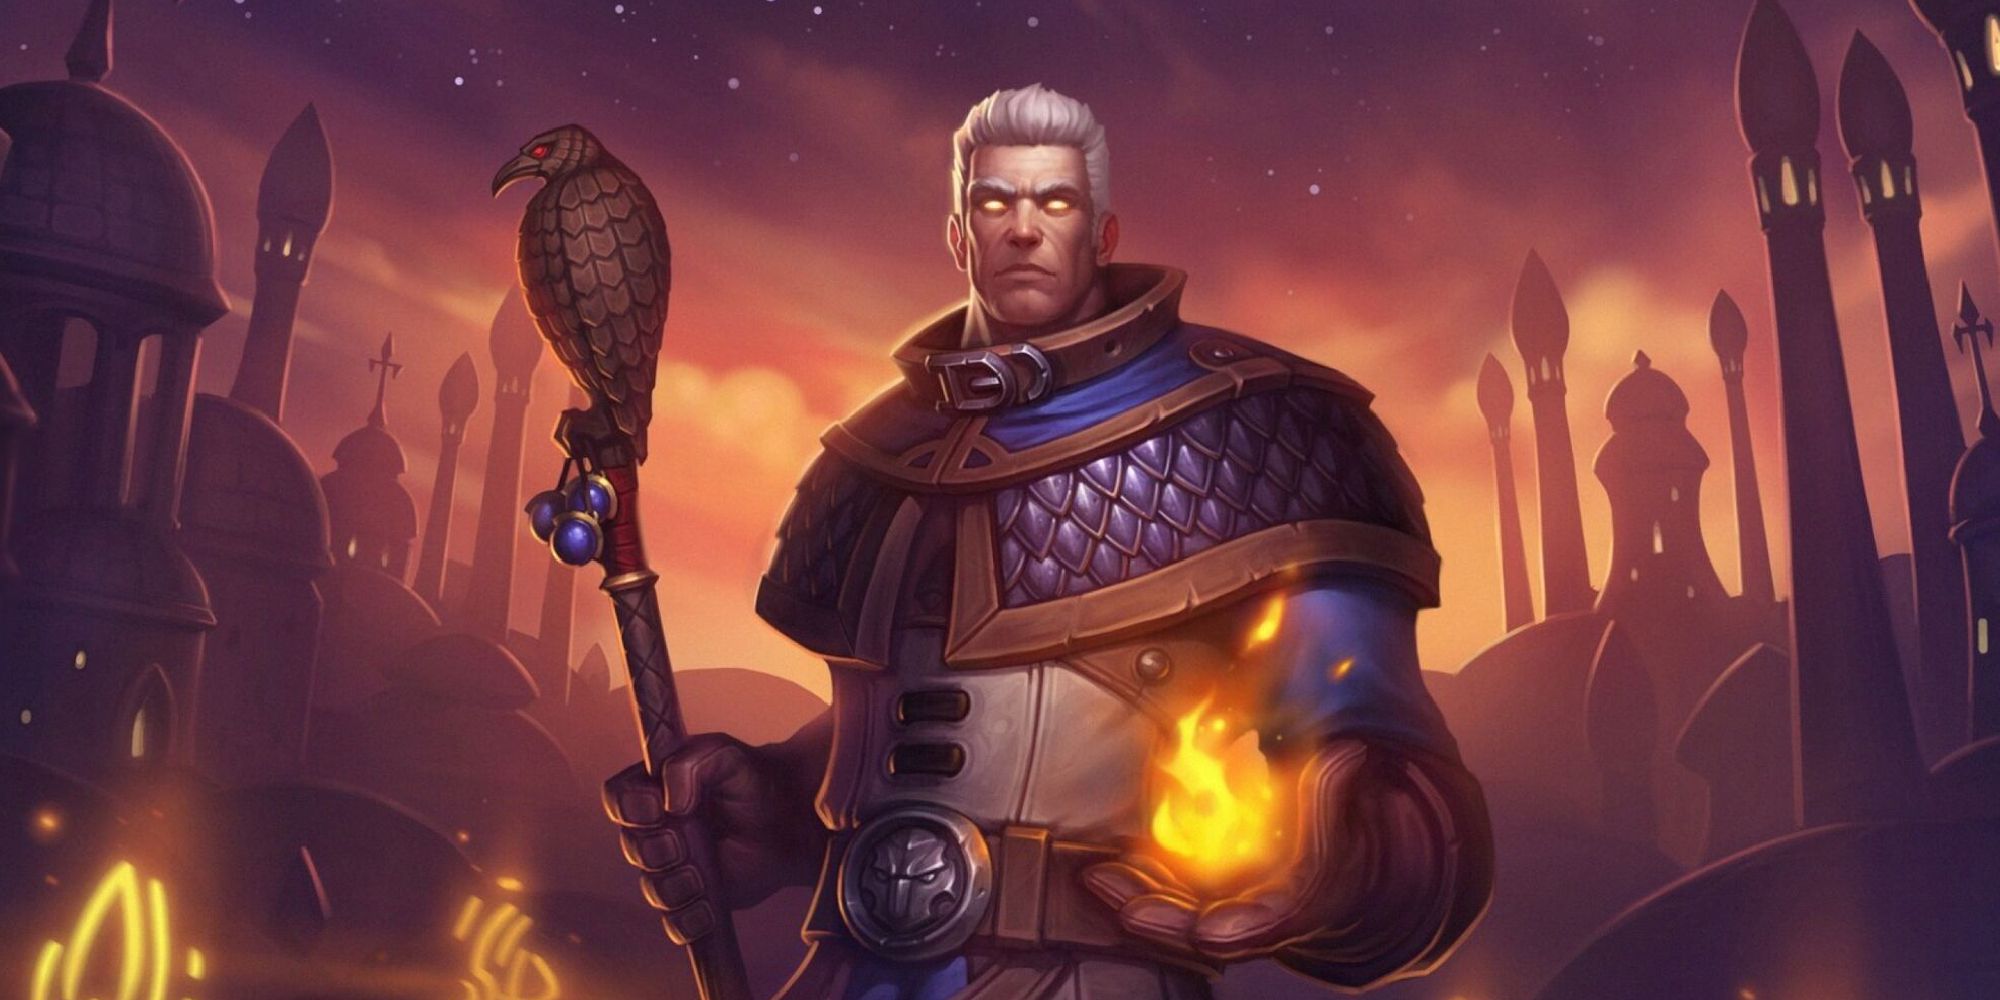 Archmage Khadgar about to cast fire spells in WoW